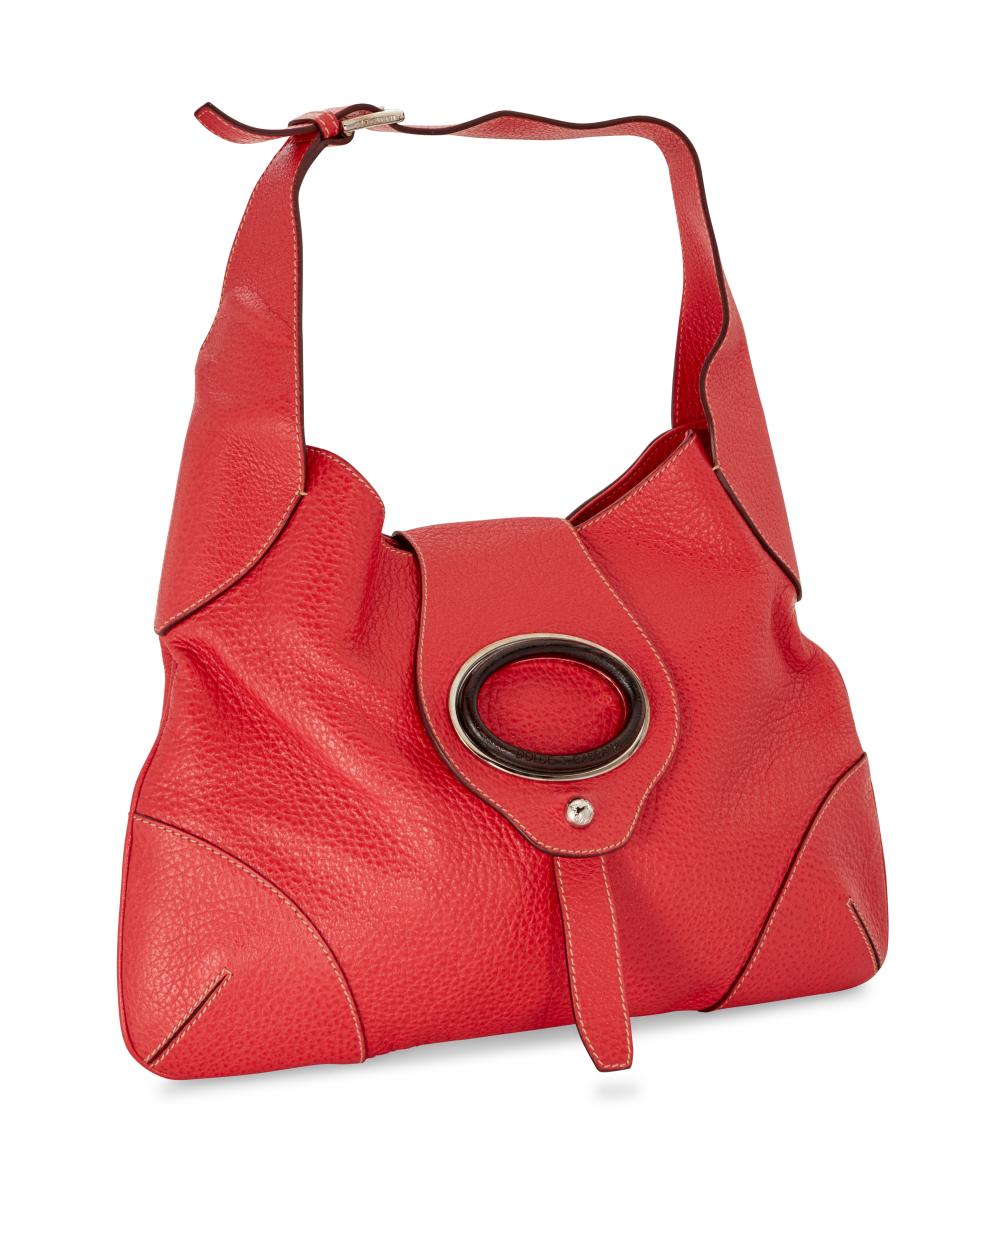 A DOLCE & GABBANA RED LEATHER HOBO